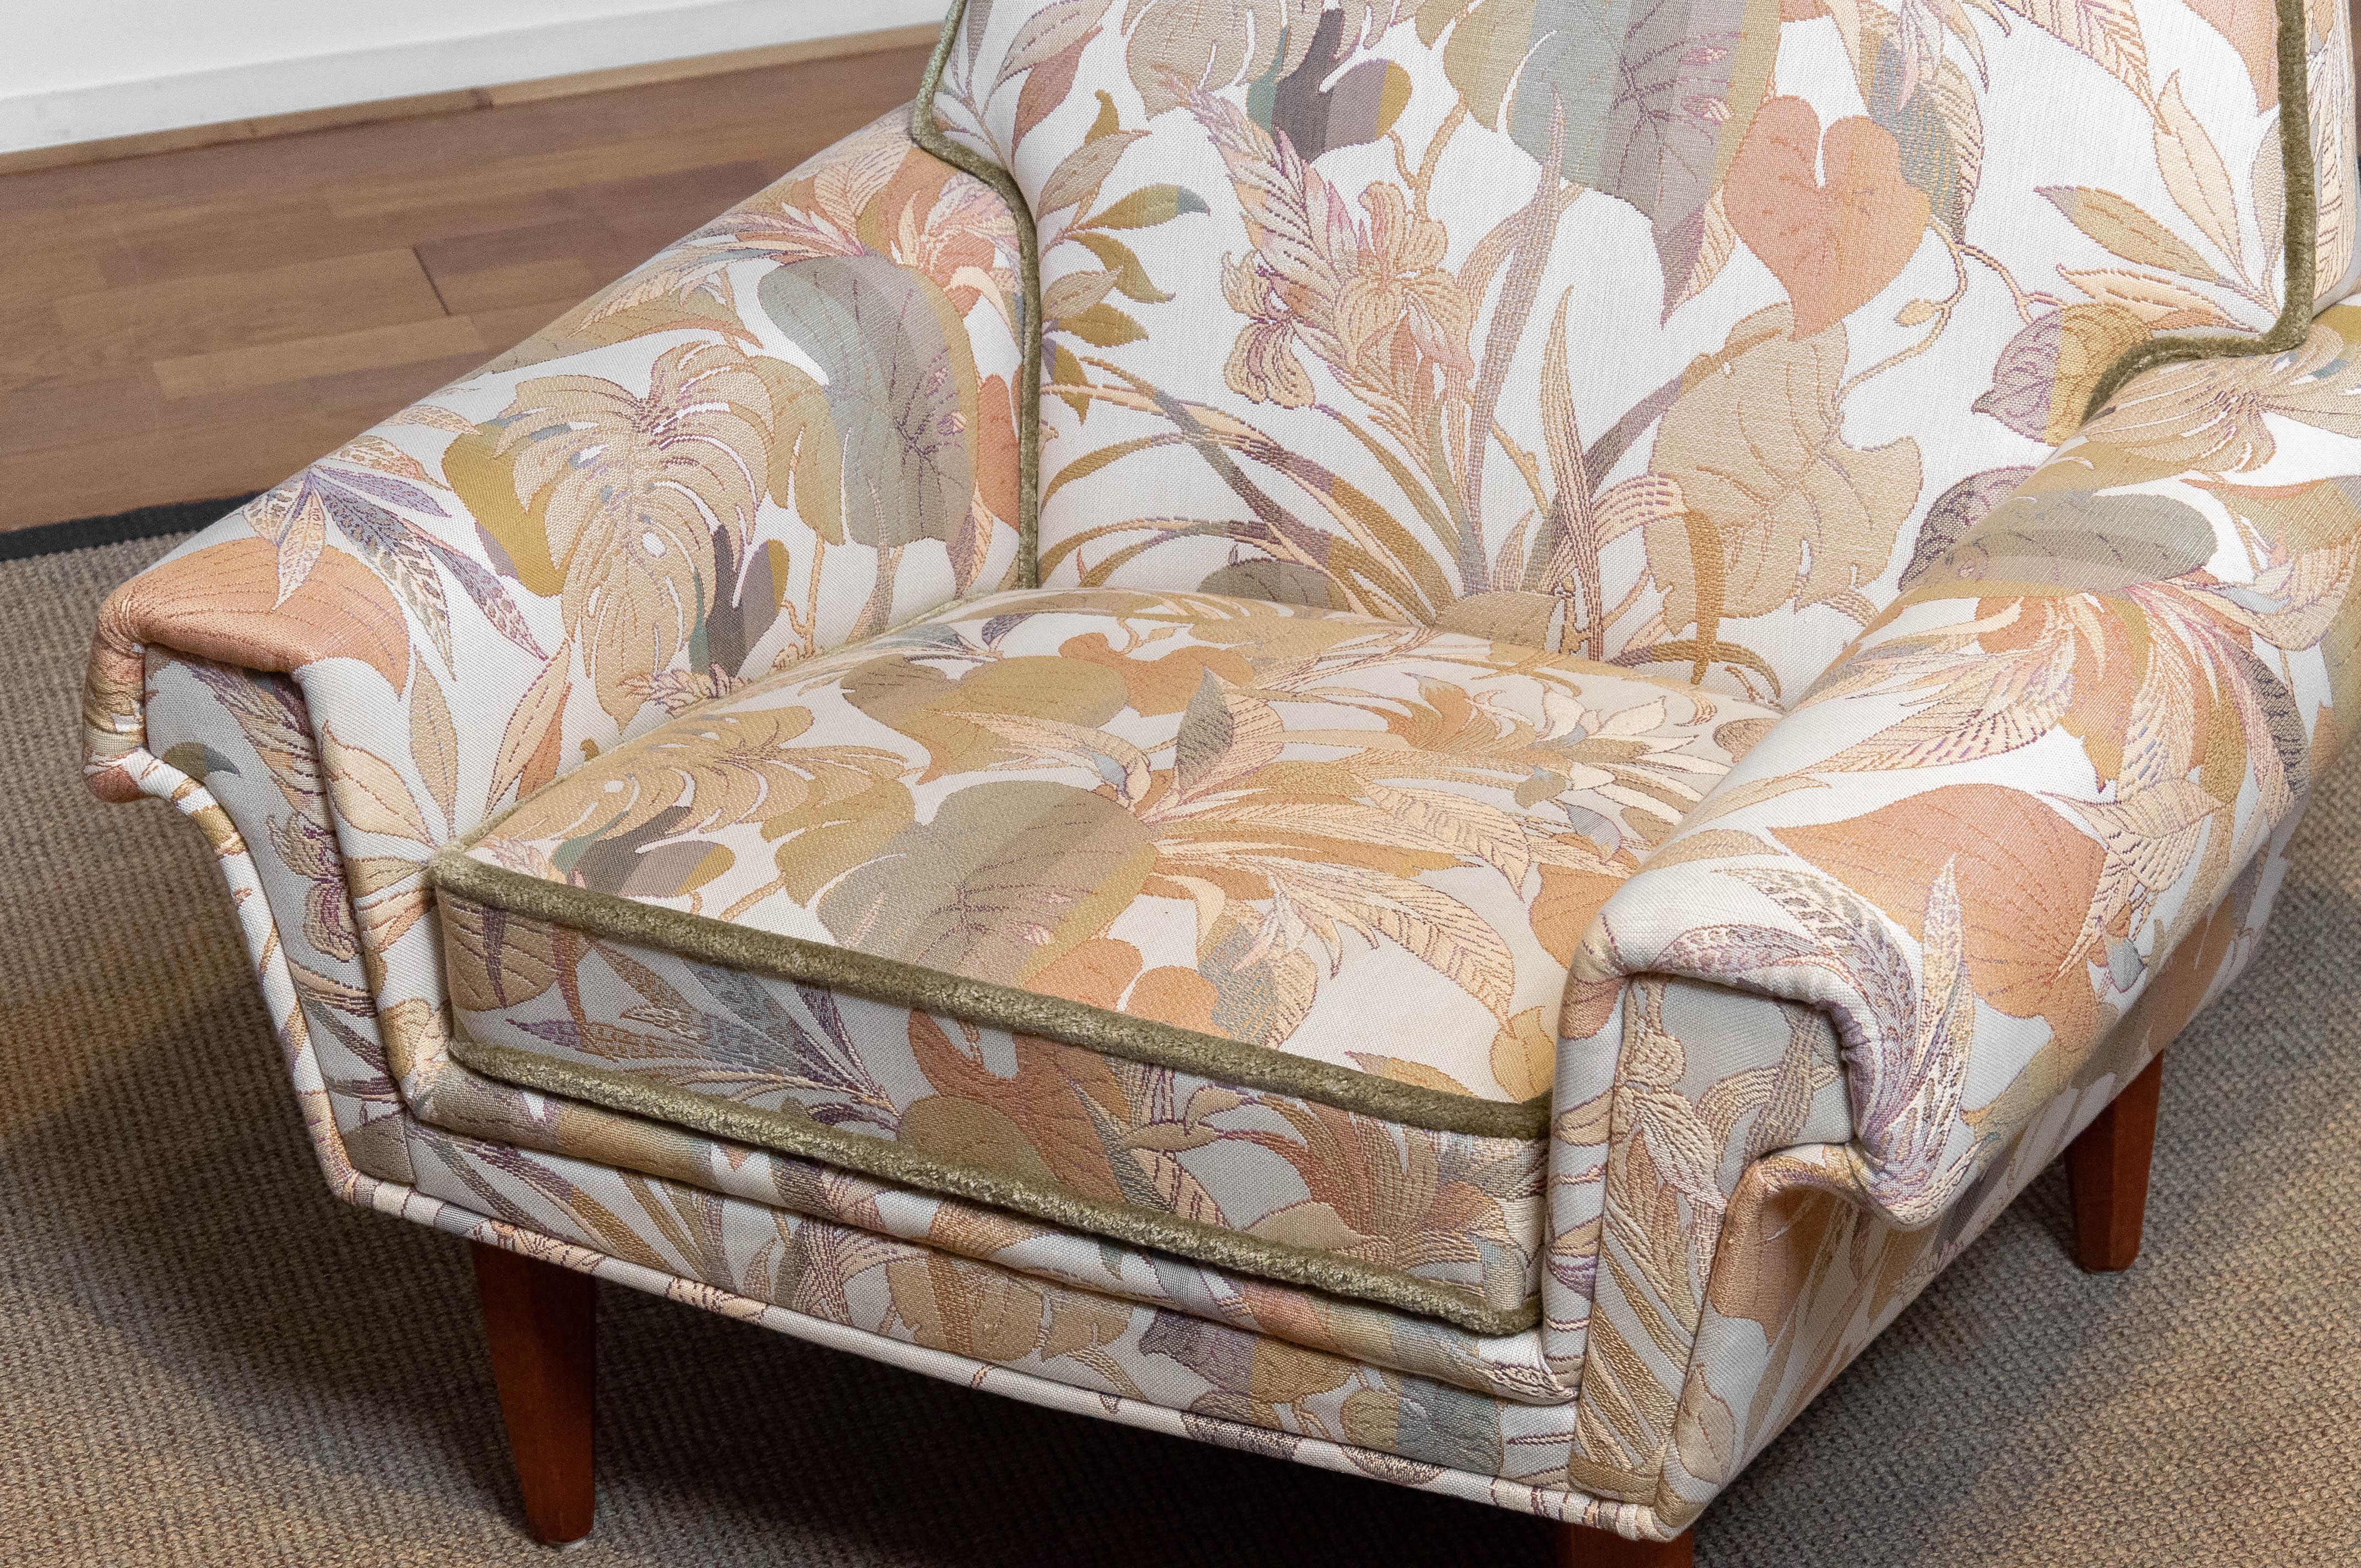 Danish Low Back Lounge Chair Upholstered Floral Jacquard Fabric from the 1970's For Sale 5